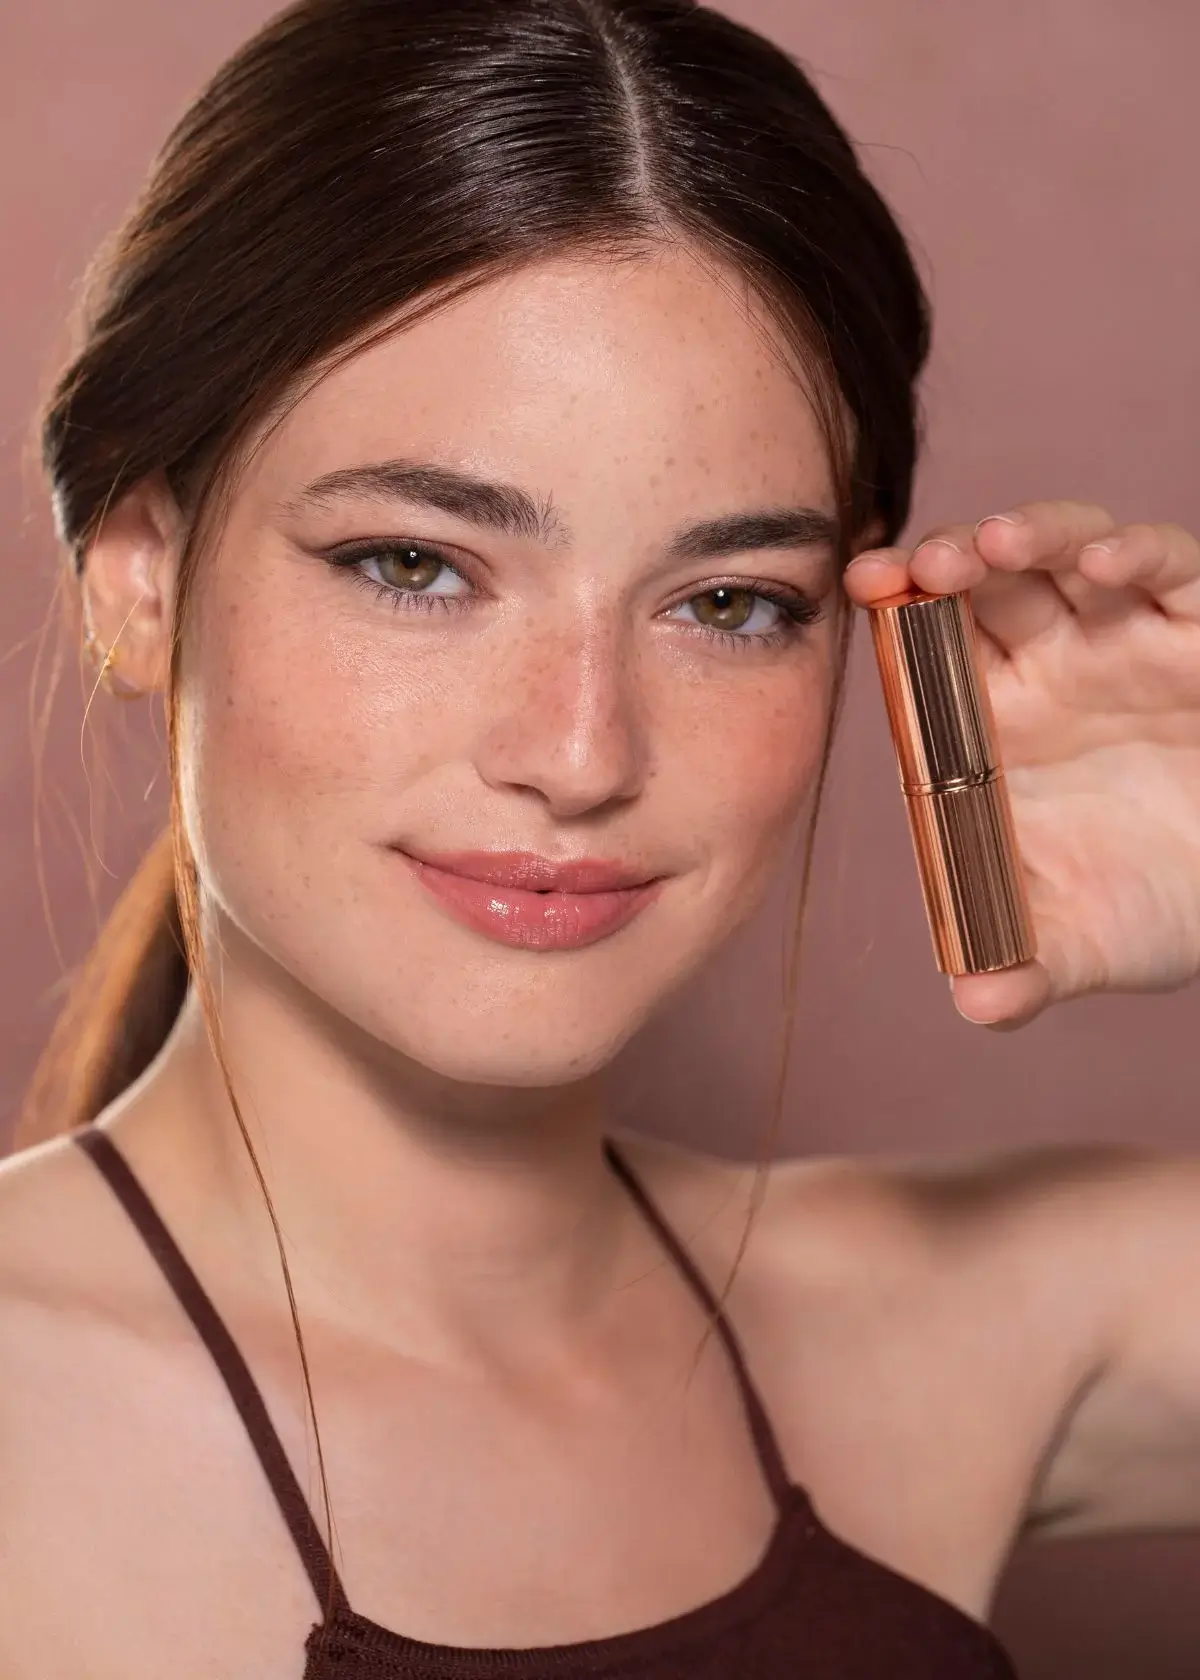 How to choose the right bronzer stick?